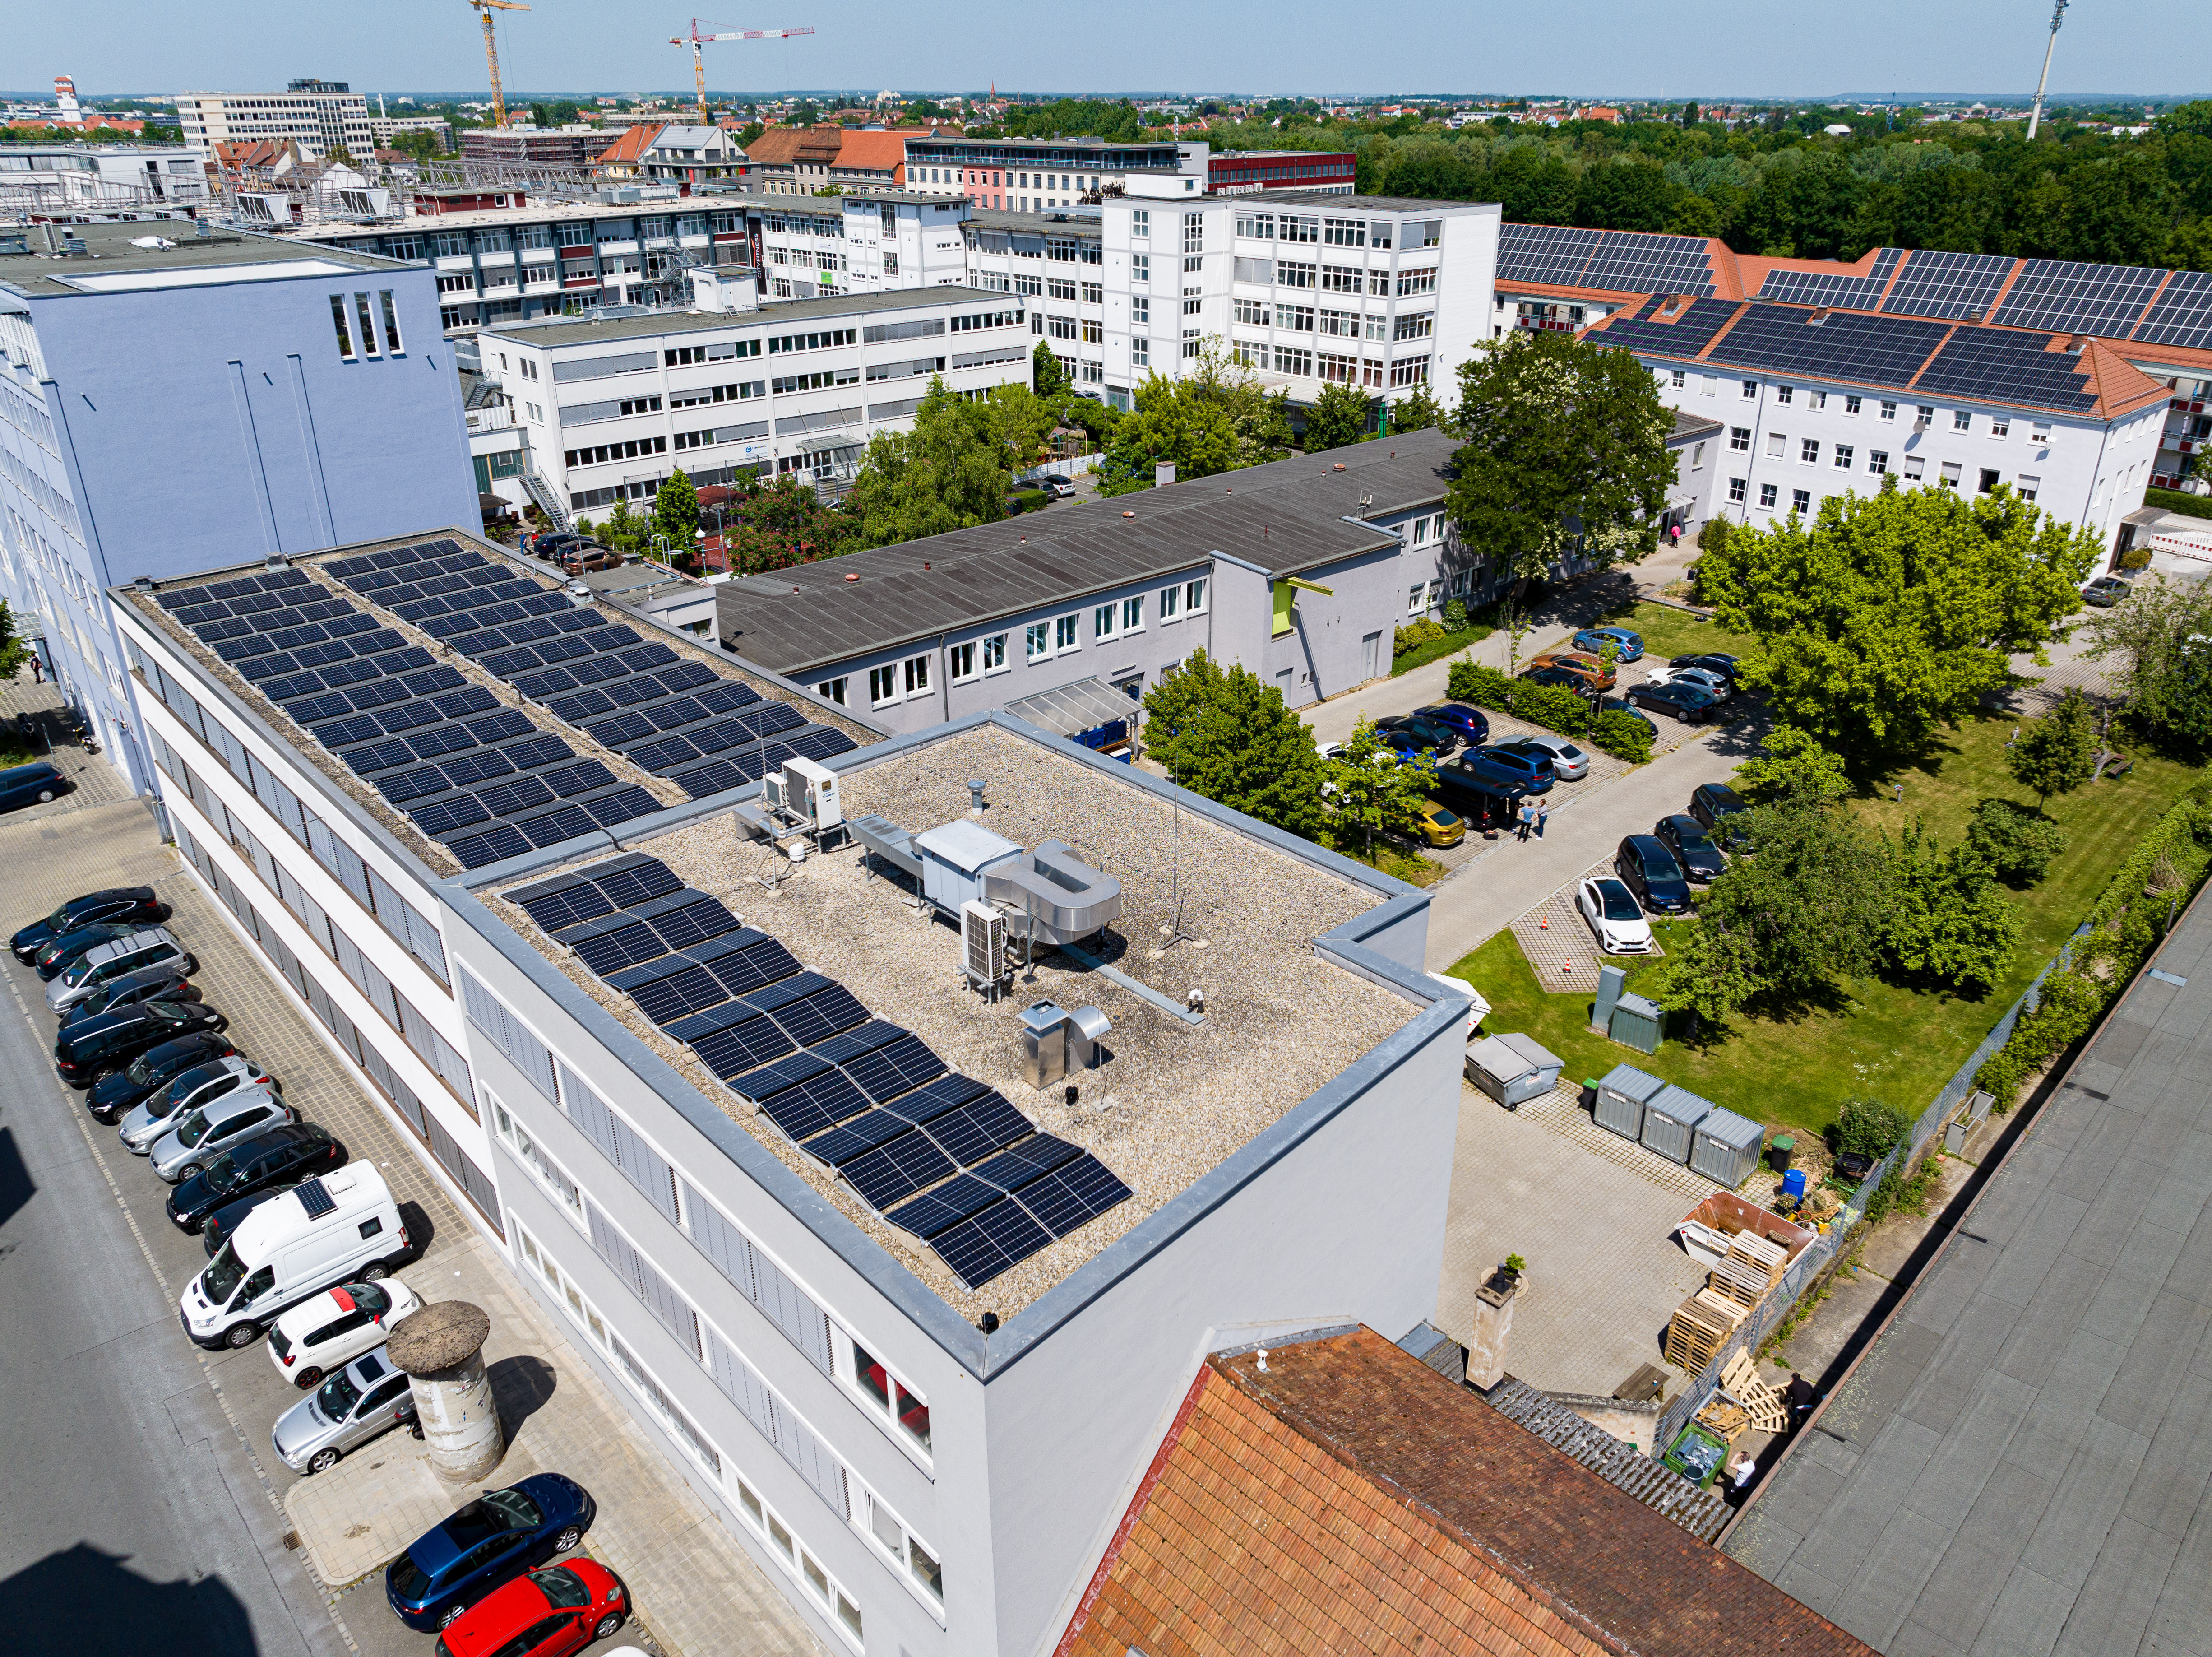 The image shows the headquarters of Noris Group Nuremberg, drone view